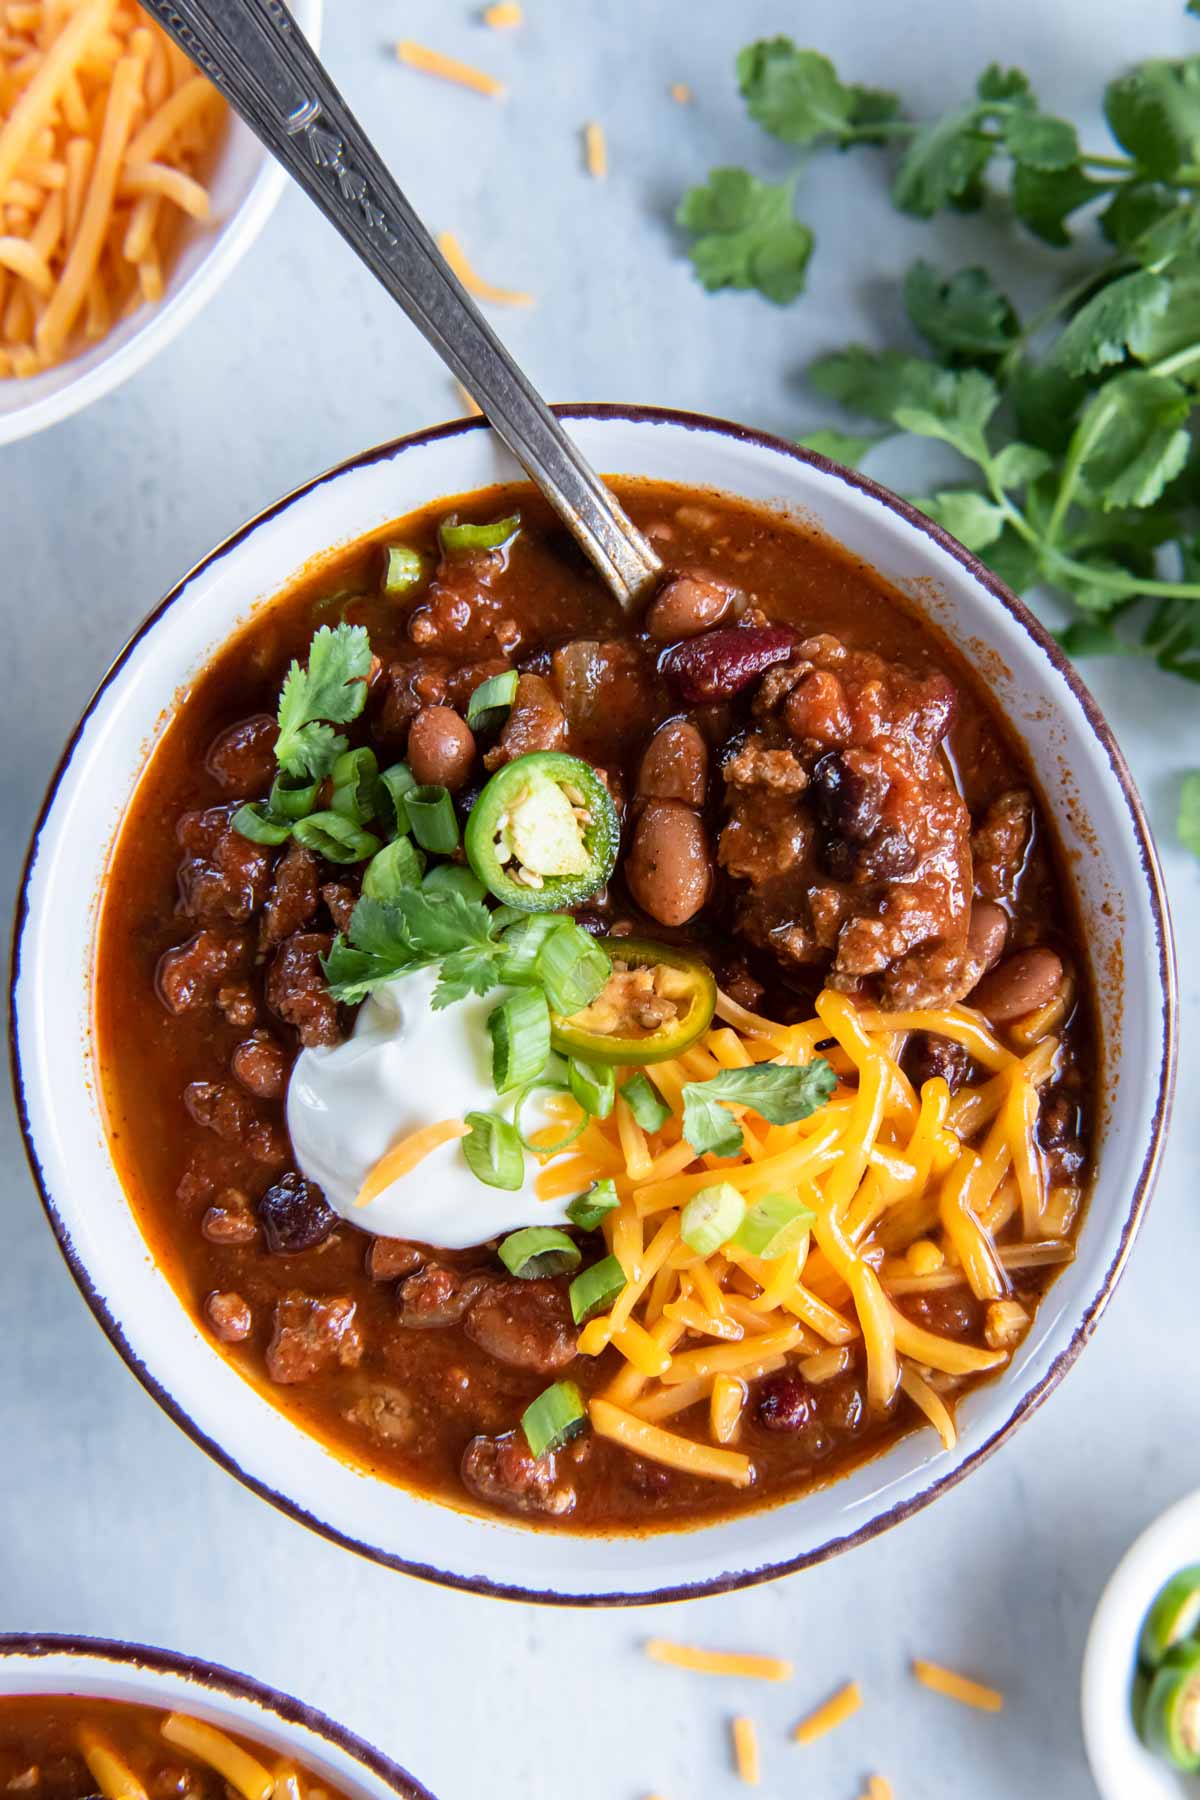 Turkey chili in a bowl with a spoon, topped with sour cream, cheddar cheese and green onions.